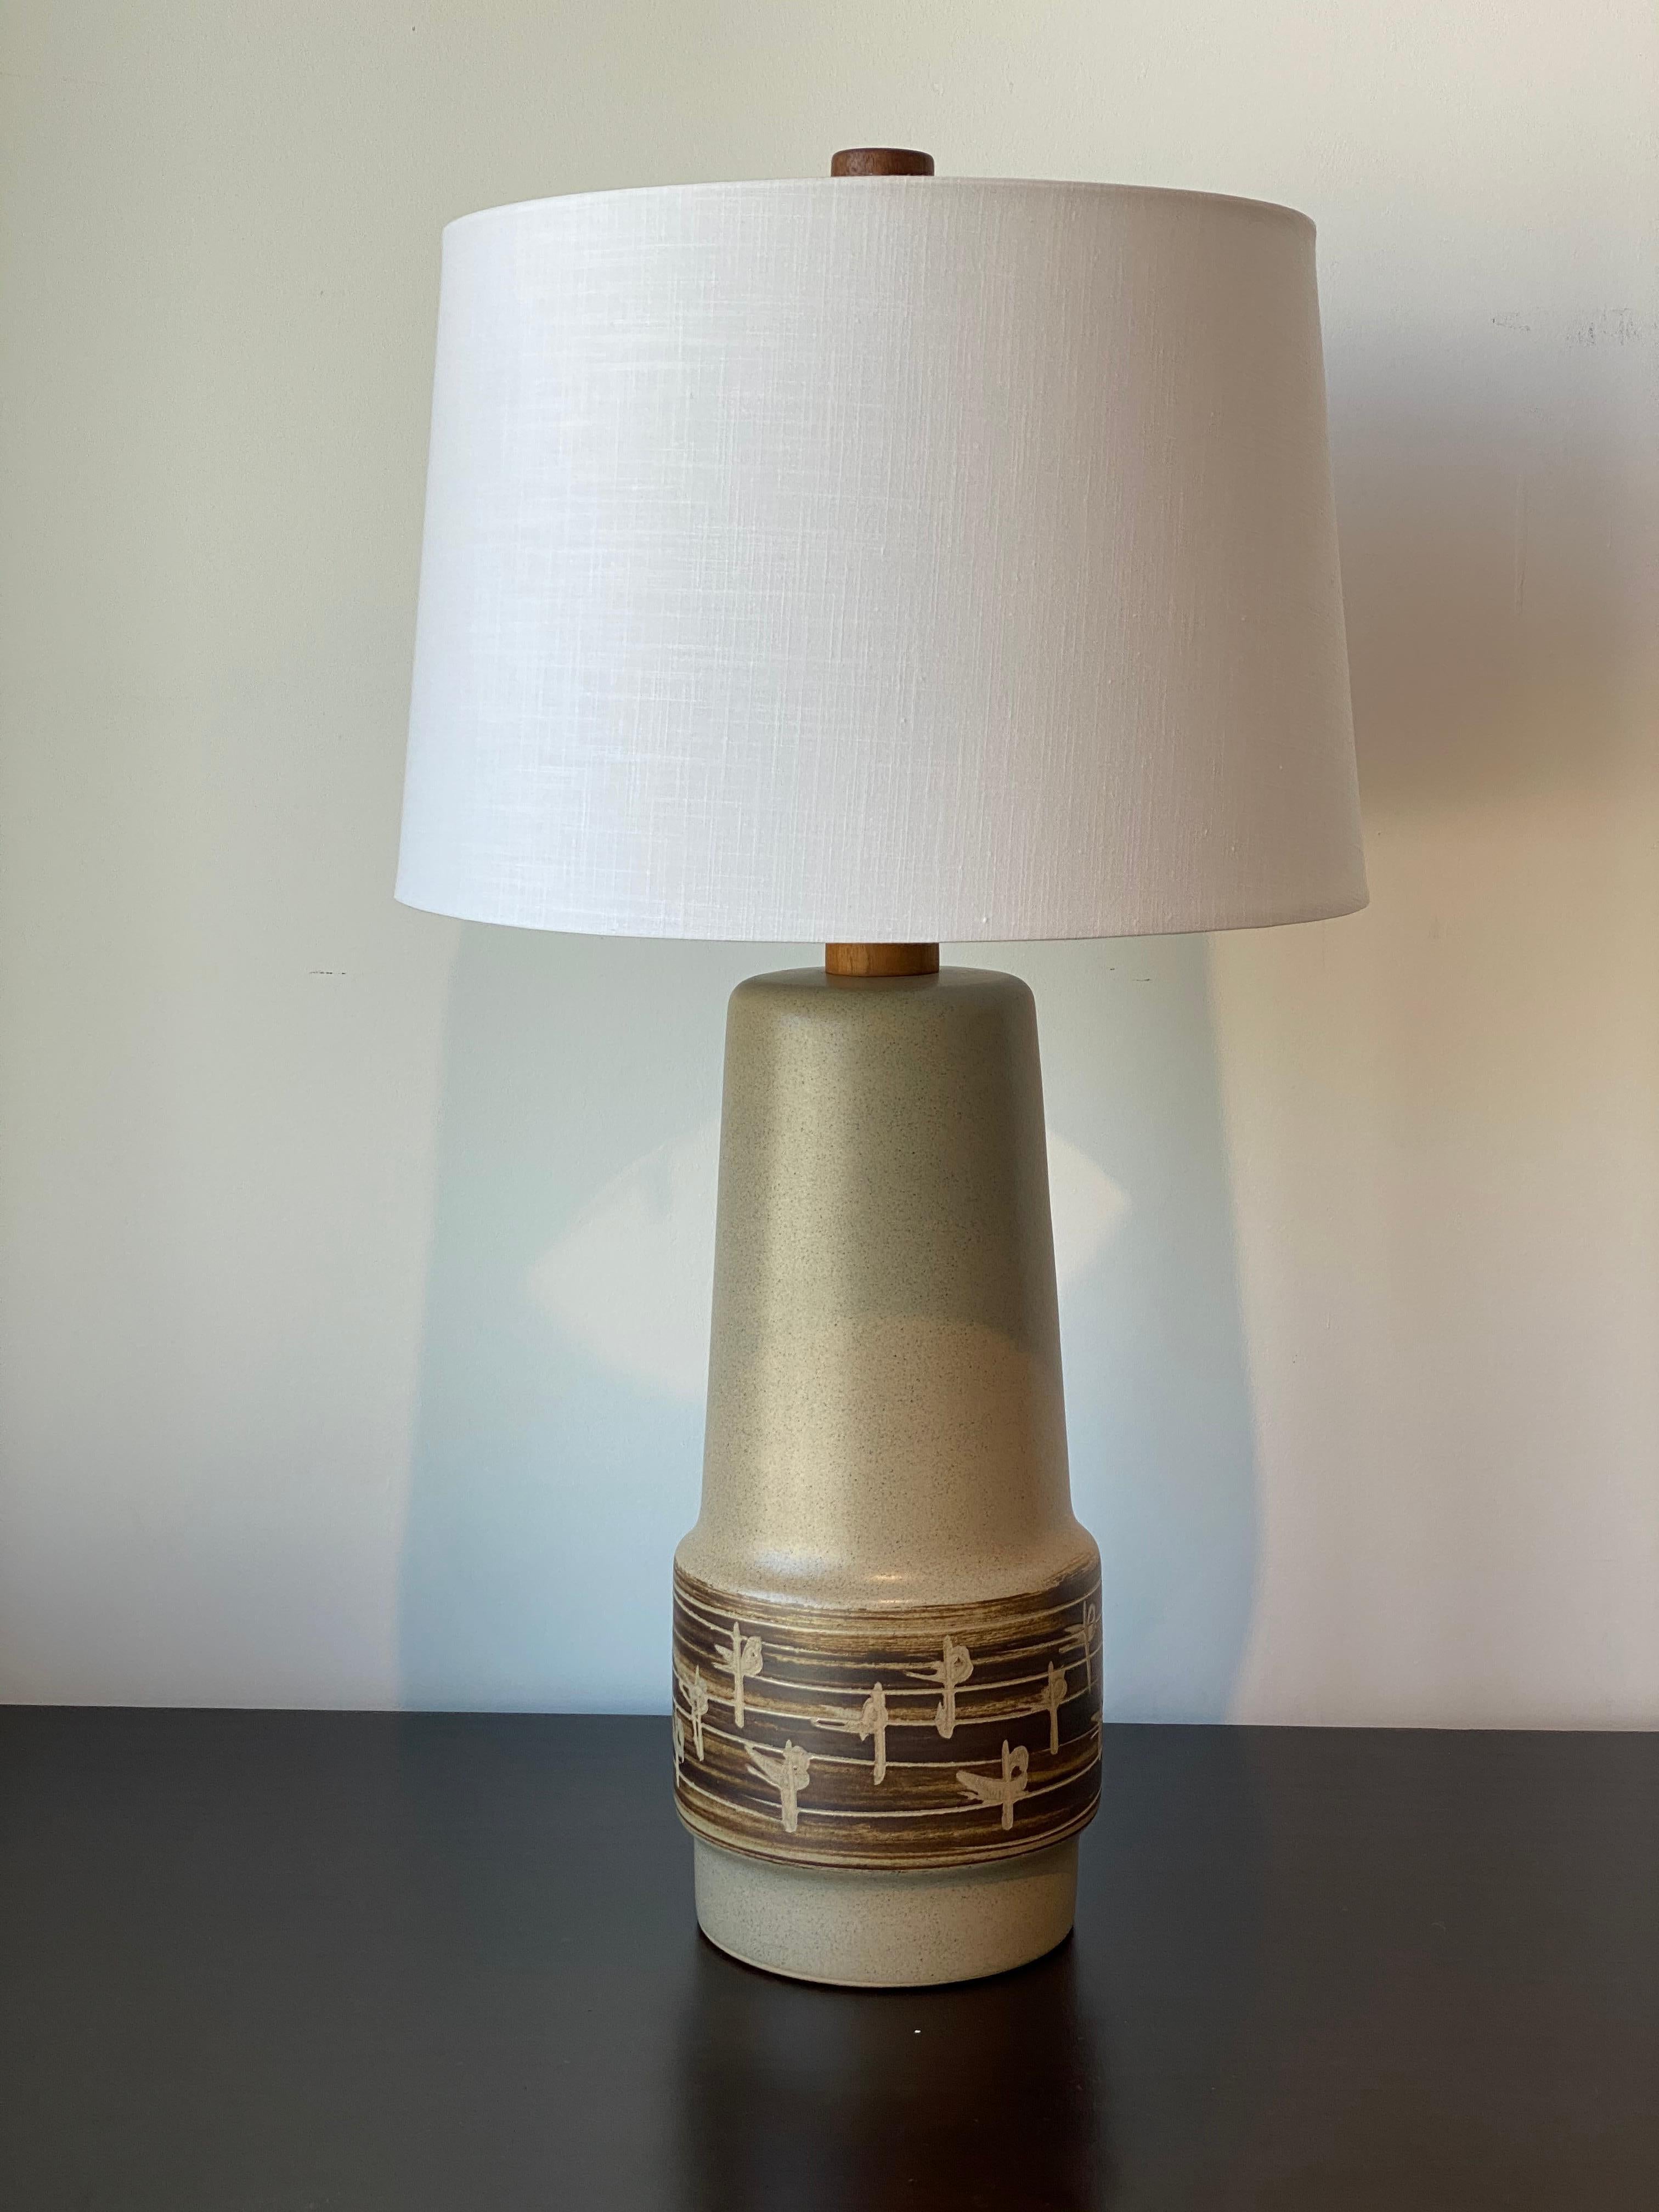 A beige and green ceramic and walnut table lamp designed by husband and wife duo Jane & Gordon Martz. Produced by Marshall Studios, Indianapolis. 

Bases are slip-cast and then dipped into glaze and hand painted. Design also incorporates exquisite